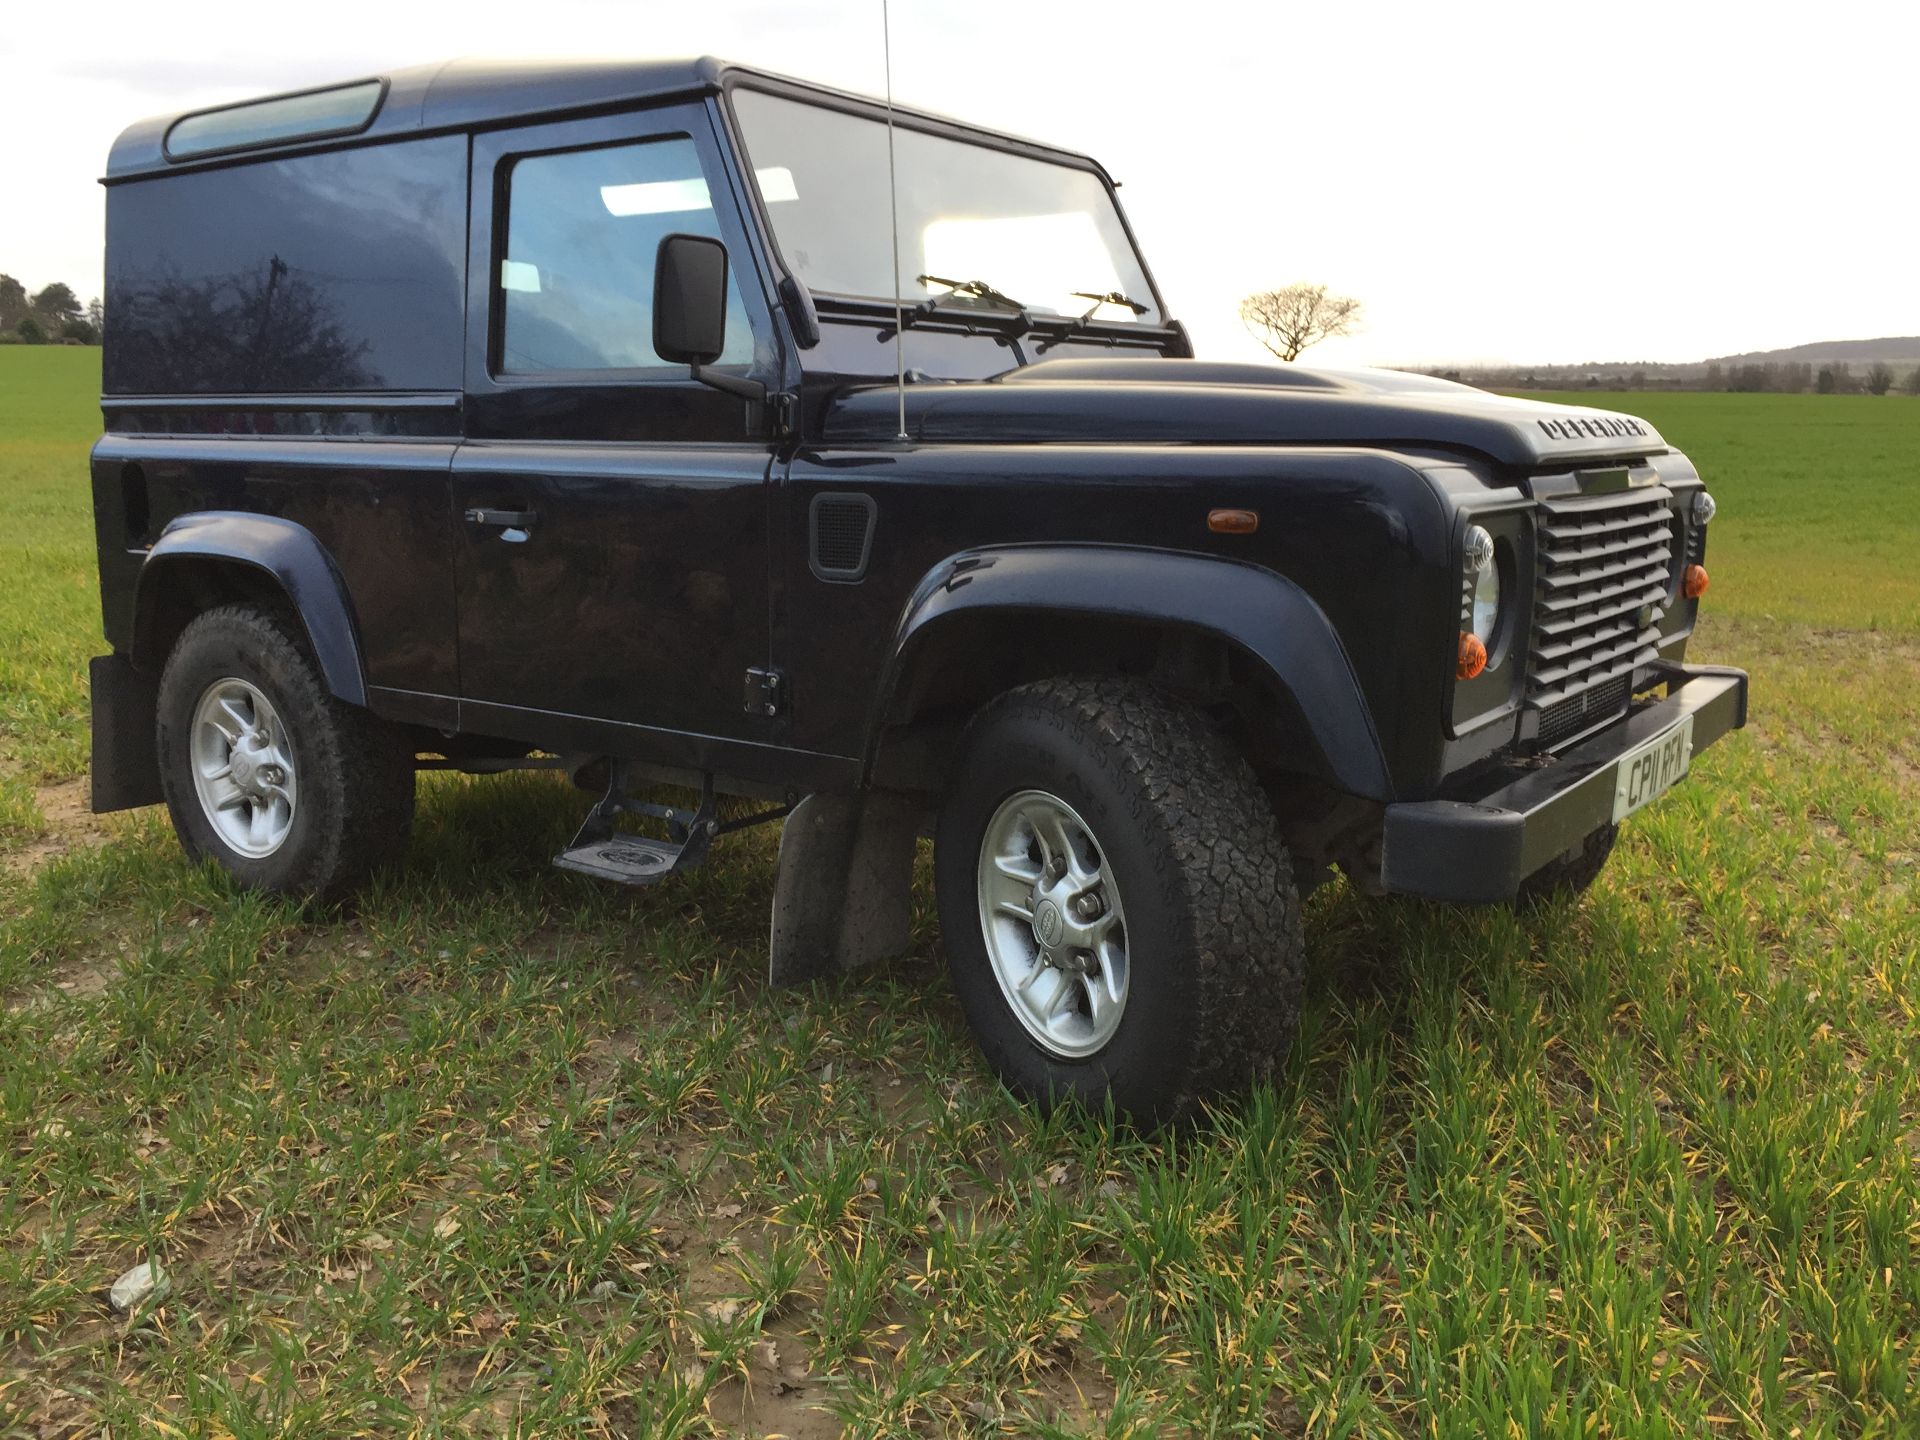 2011 LANDROVER SWB COUNTY PACK REG NO: CP11 RFN - 90,000 MILES - Image 7 of 8